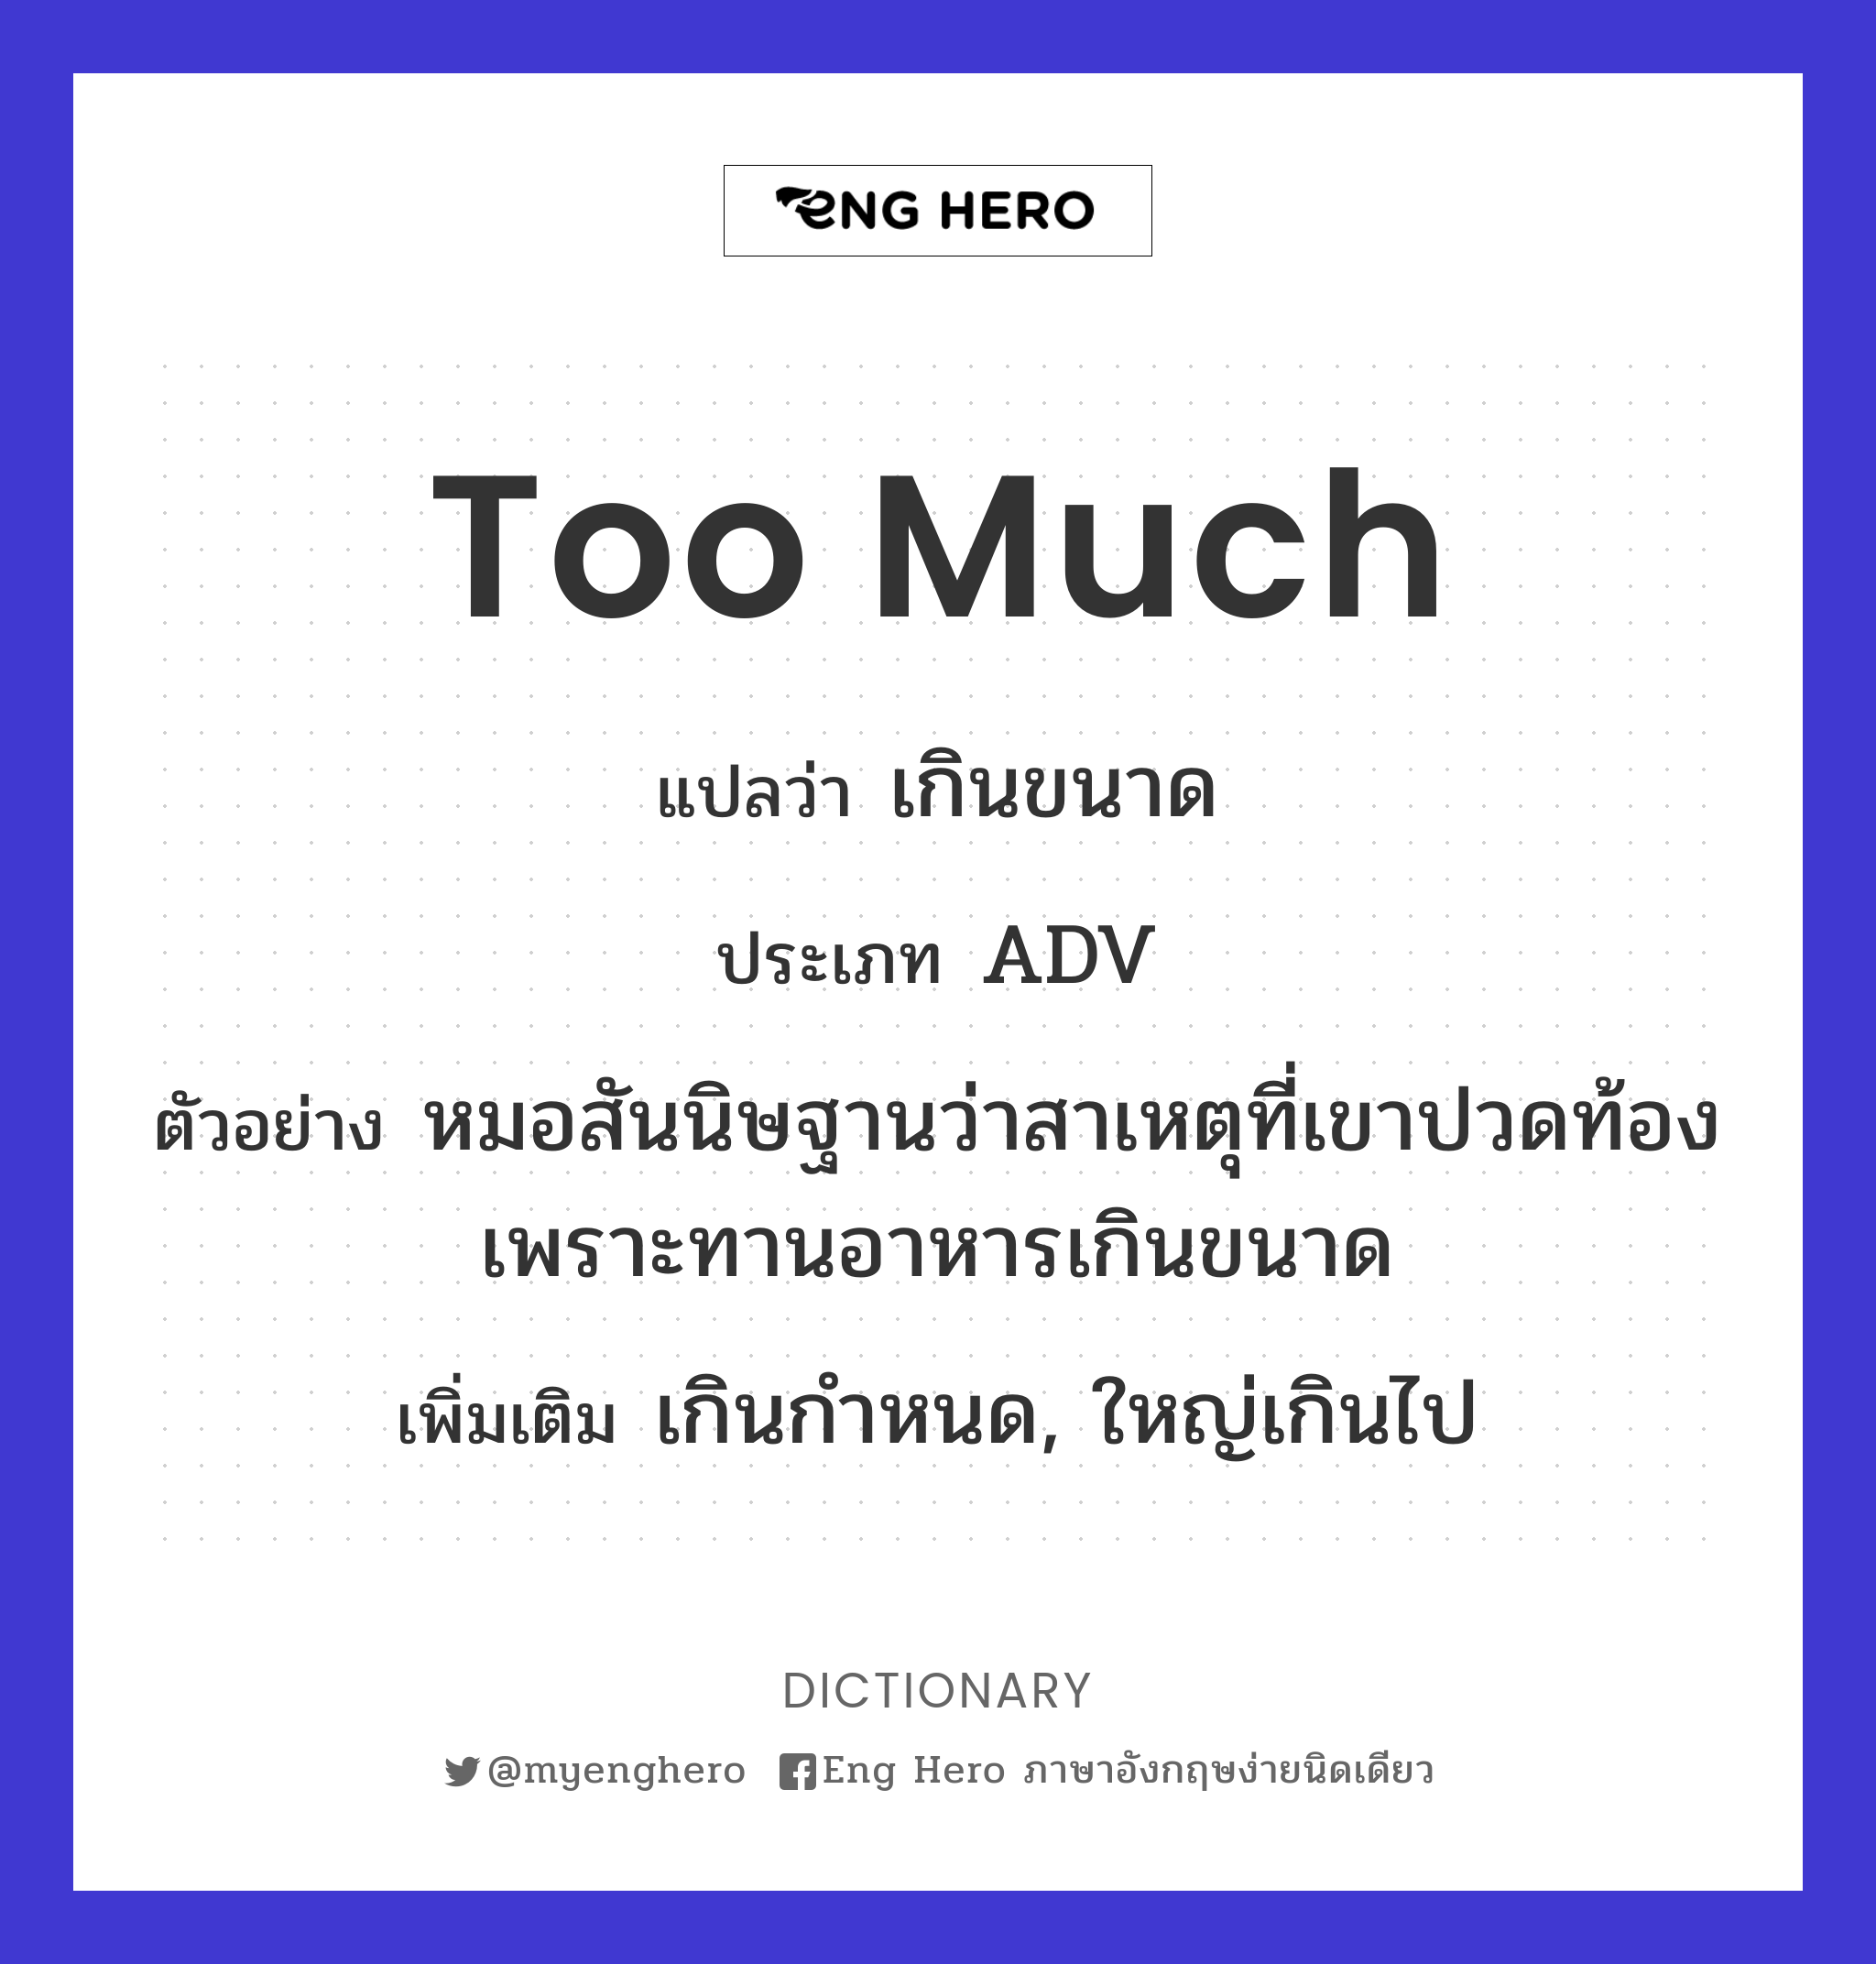 too much